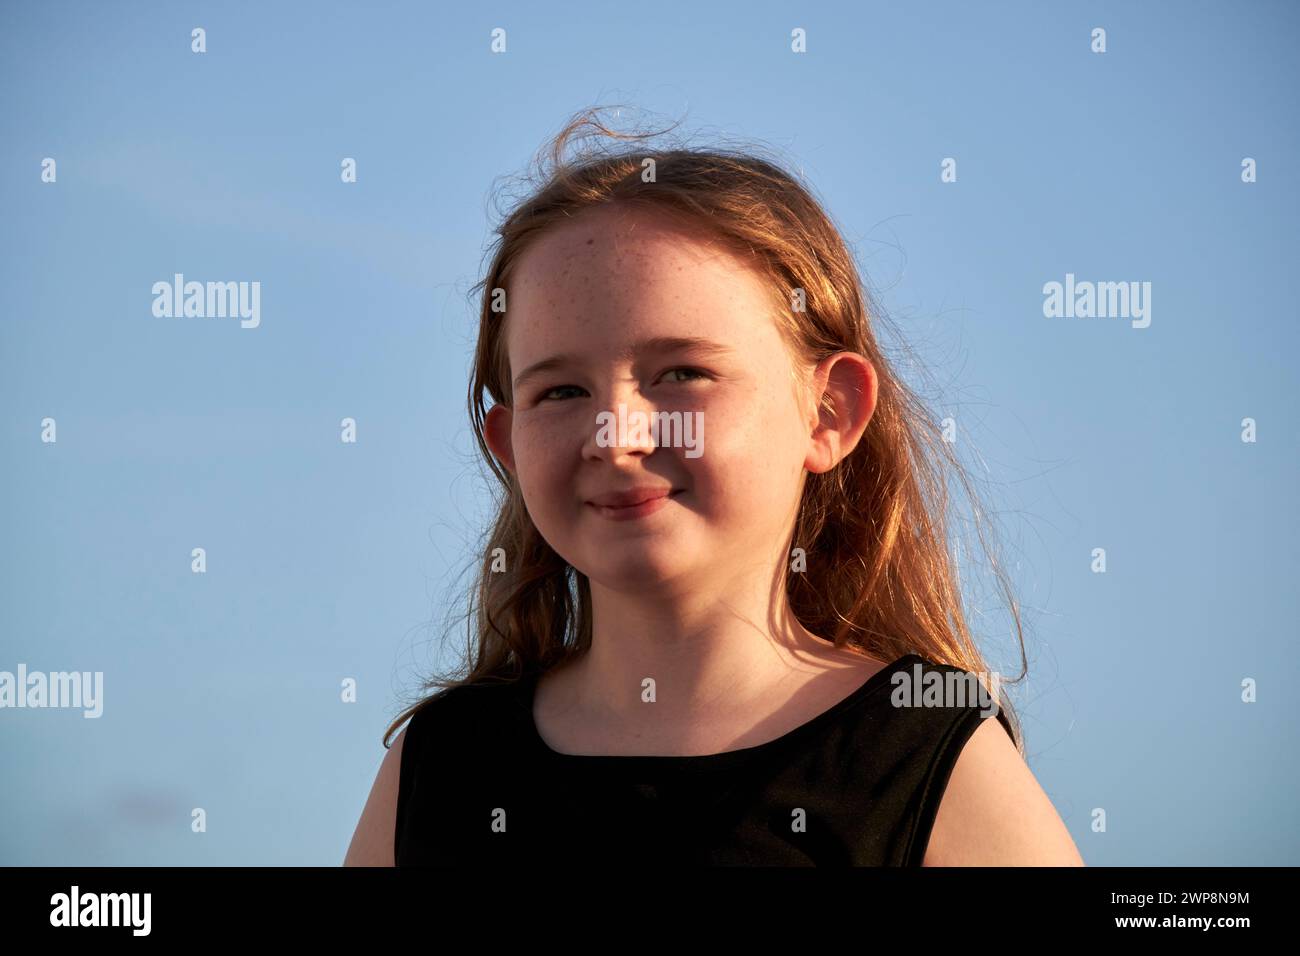 young 10 year old british irish girl wearing black dress smiling looking to camera during golden hour sunset Lanzarote, Canary Islands, spain Stock Photo